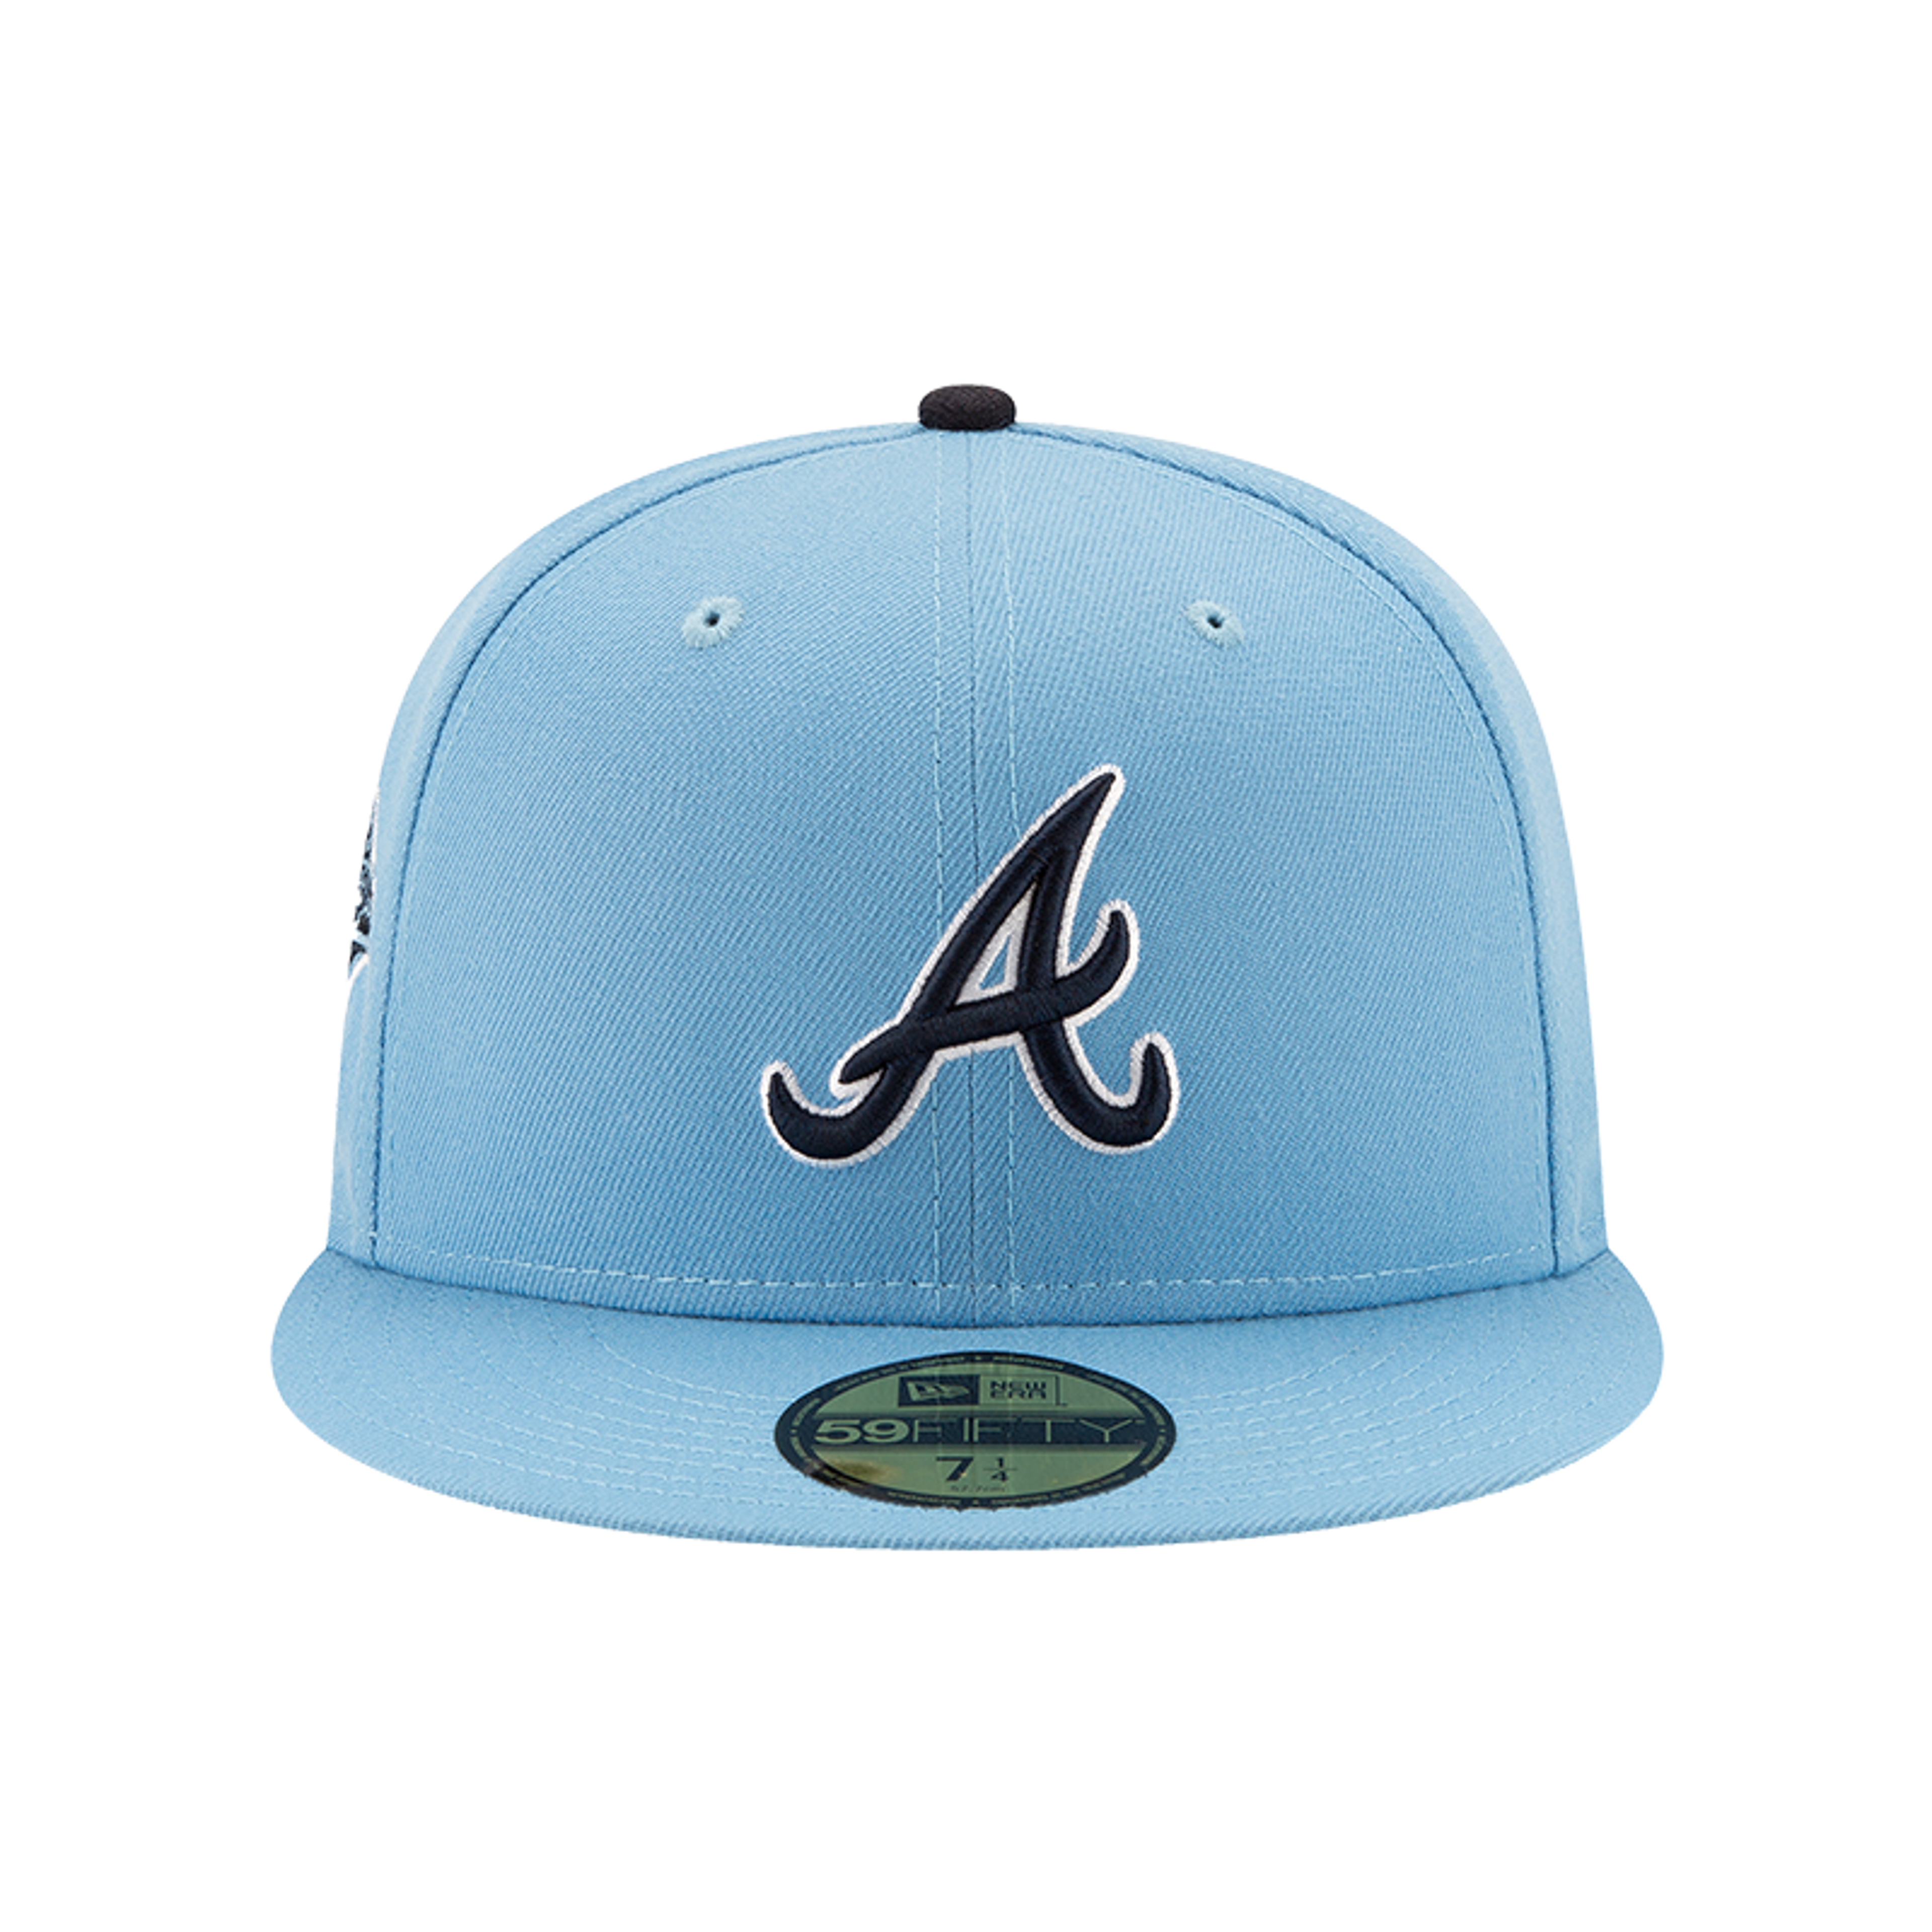 Offset x Atlanta Braves 59Fifty Fitted Cap Collection by Offset x